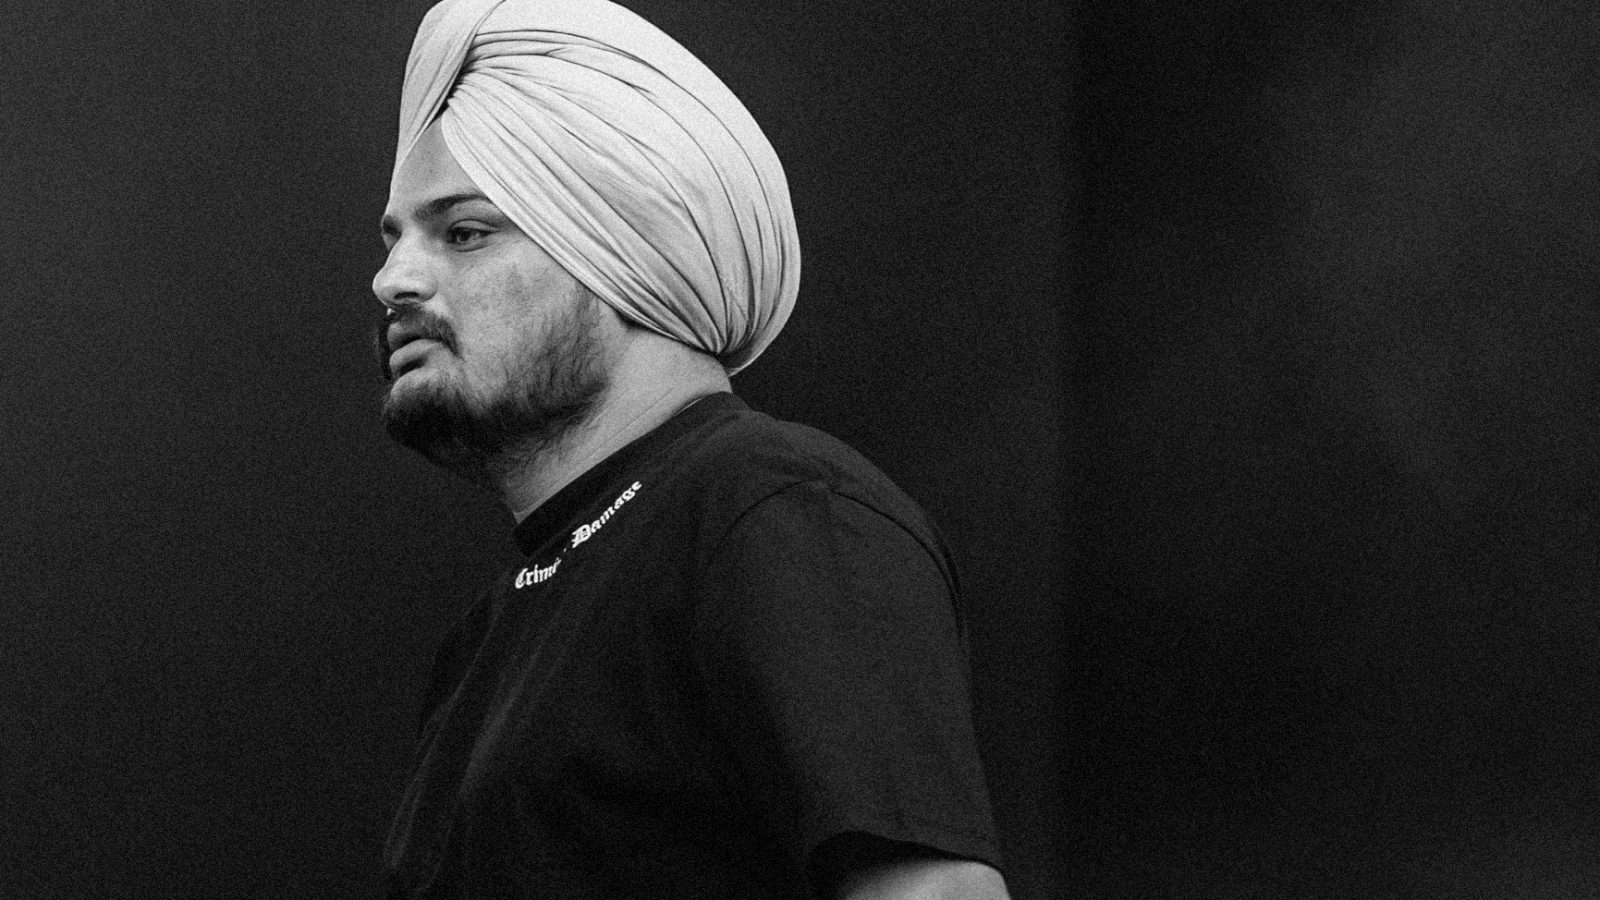 Sidhu Moose Wala's voice used for AI songs a year after his death - Rest of  World